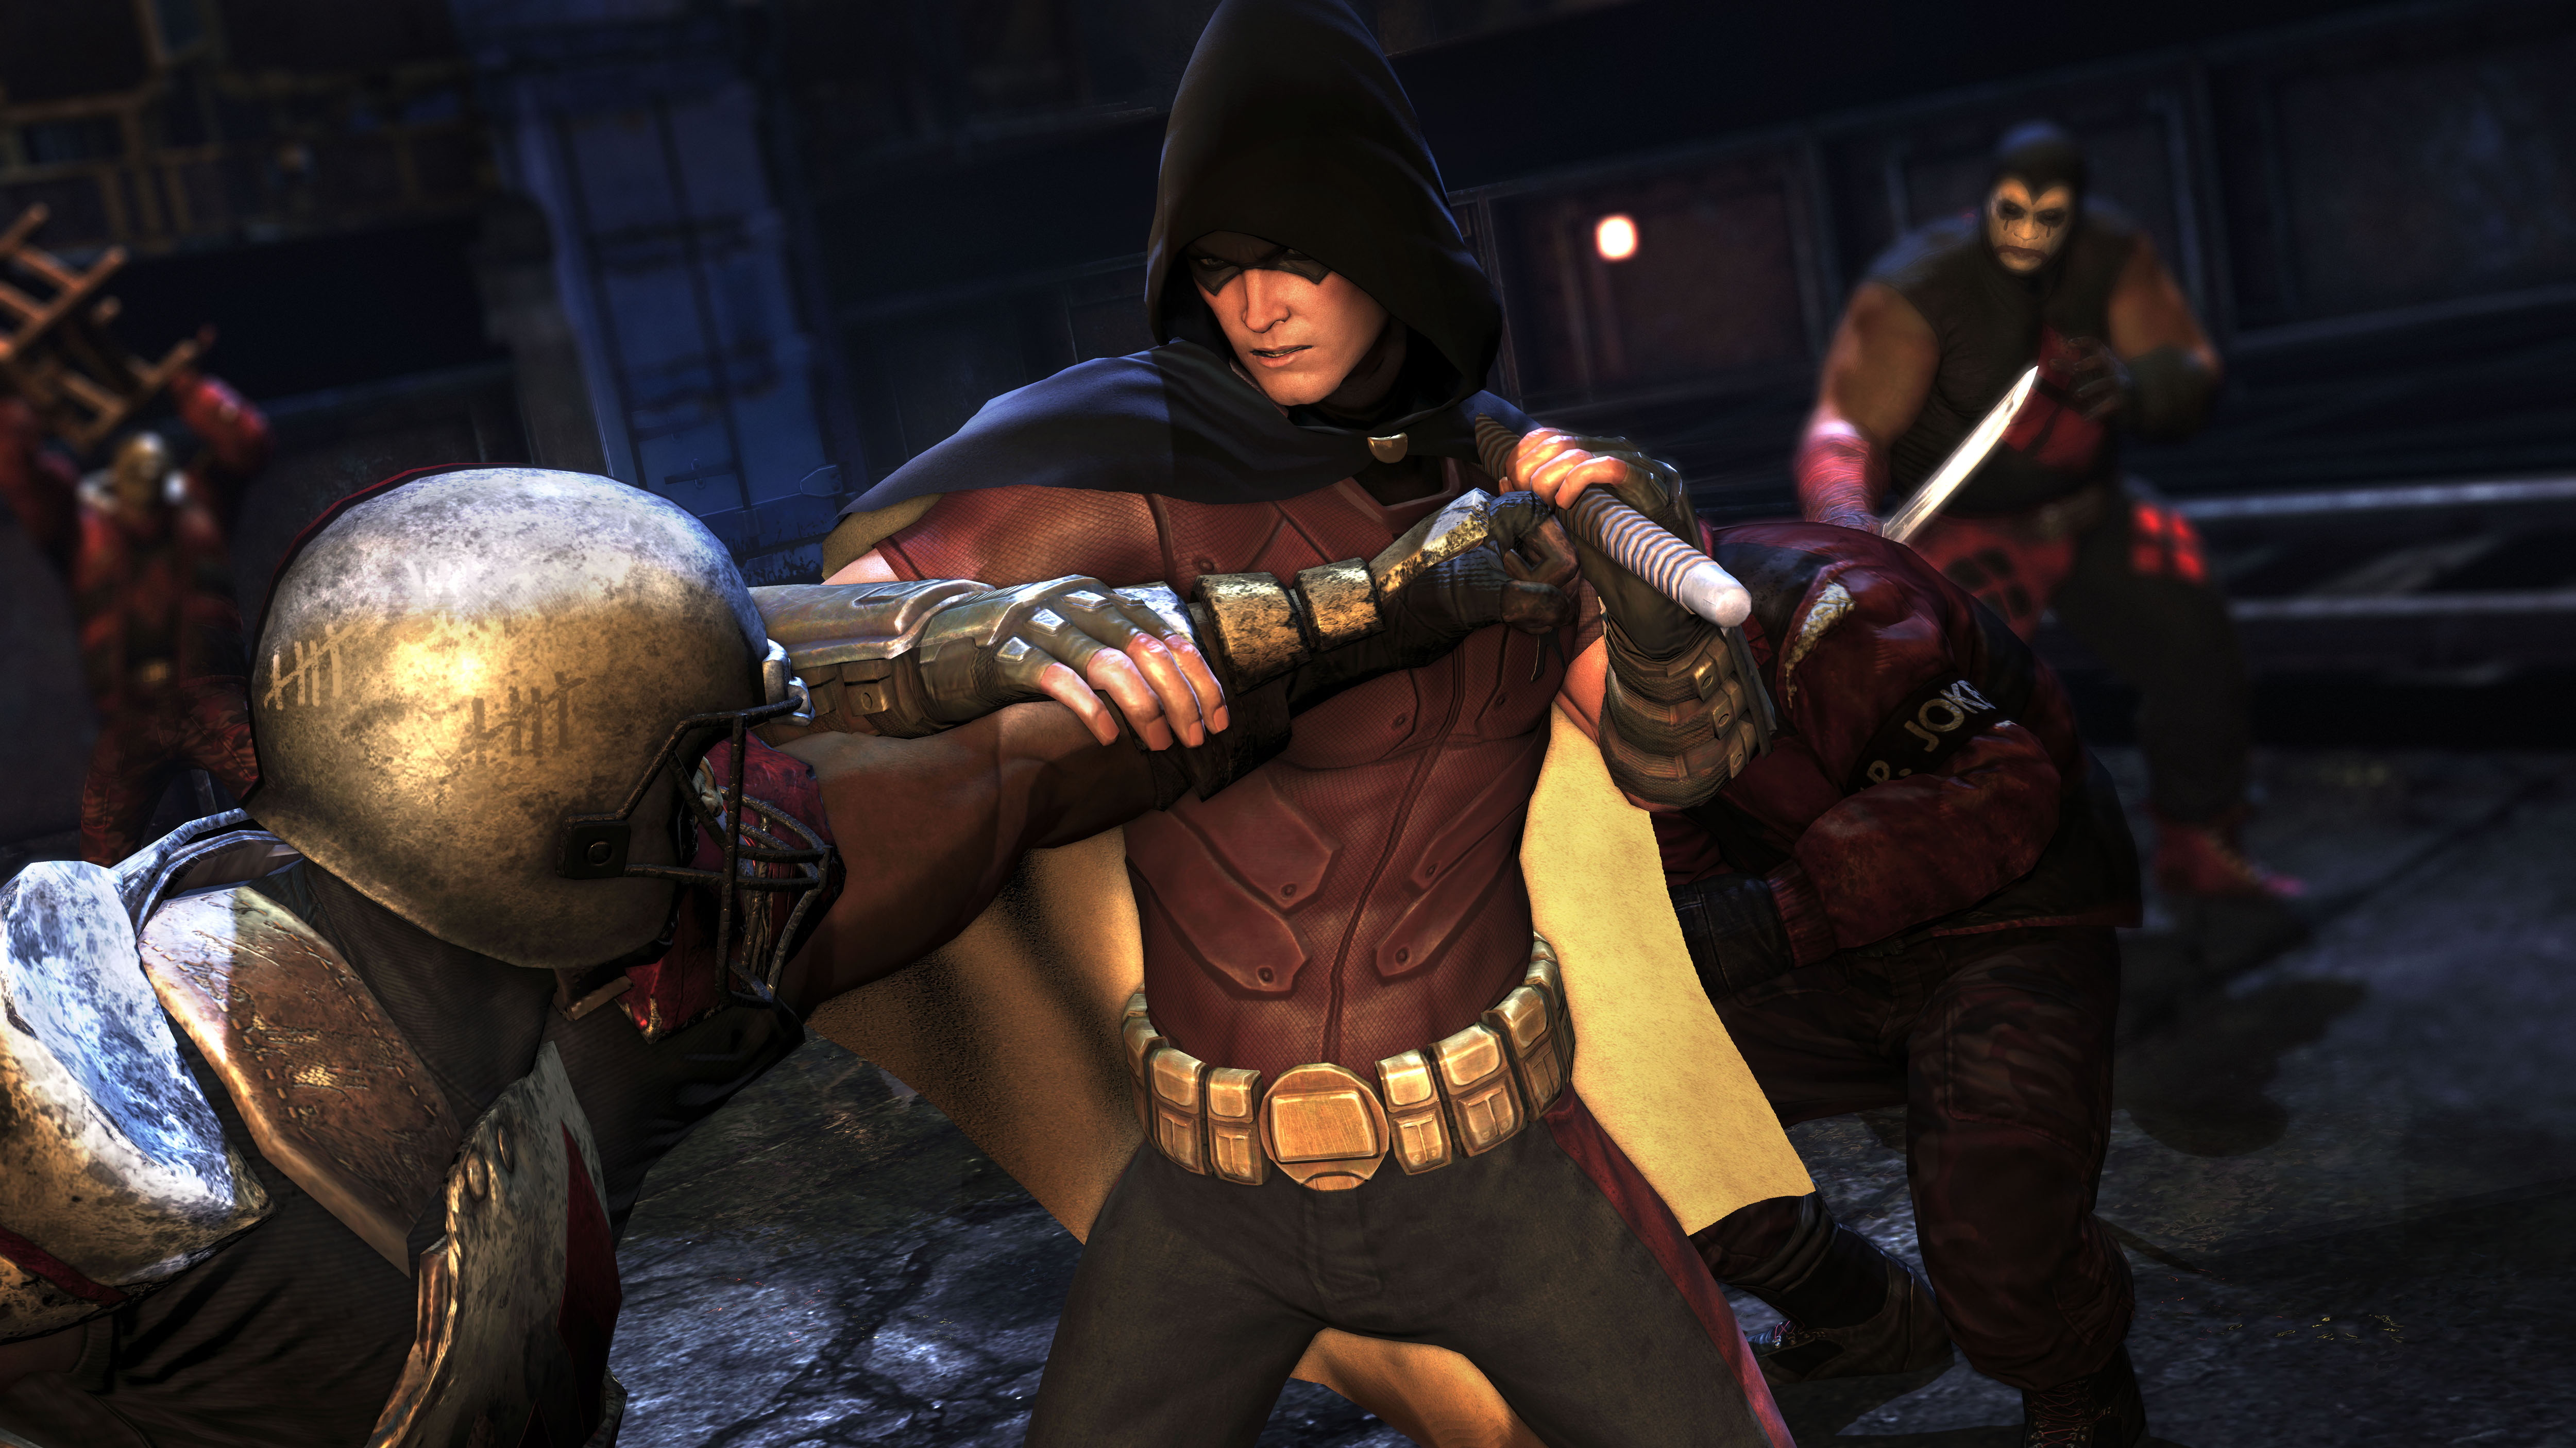 HAVE YOUR OWN ROBIN COSTUME FROM ARKHAM CITY!